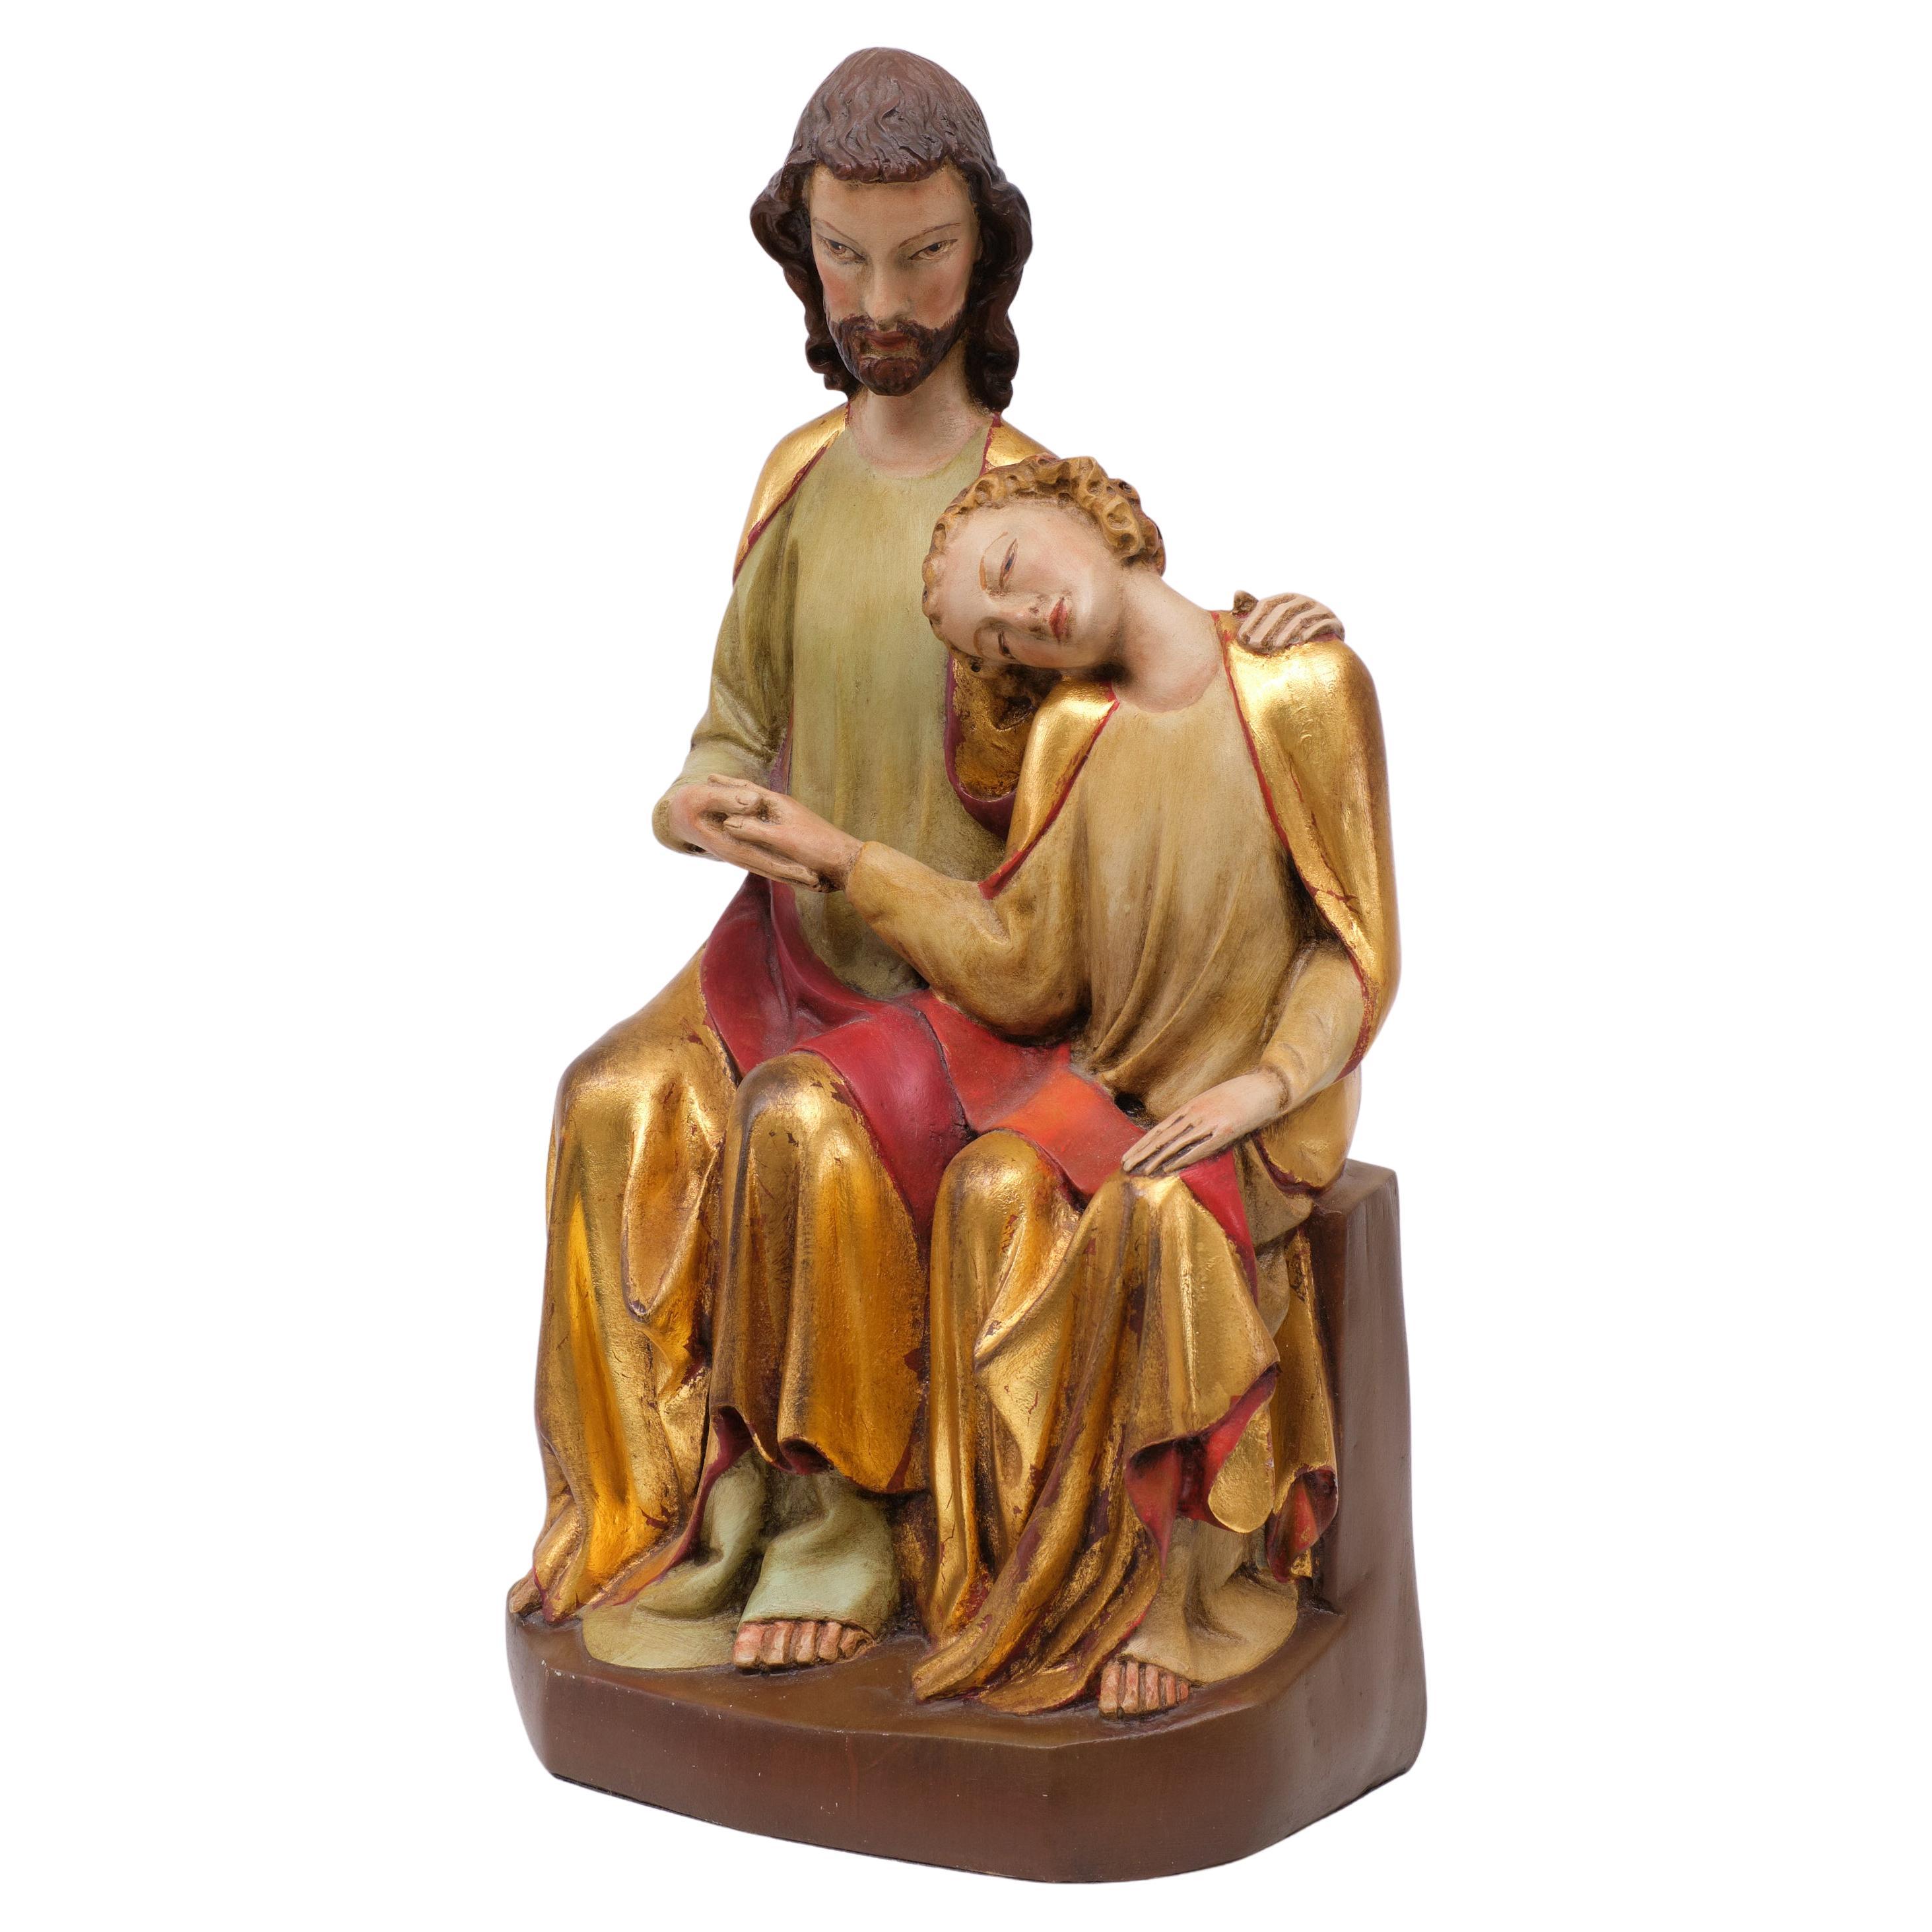 This Item is an Identical Museum Reproduction  The carving shows Christ and St John sitting on a bench. John rests his head on Christ's chest, his eyes closed in devotion. His right hand rests in that of Christ, who places a loving arm around his